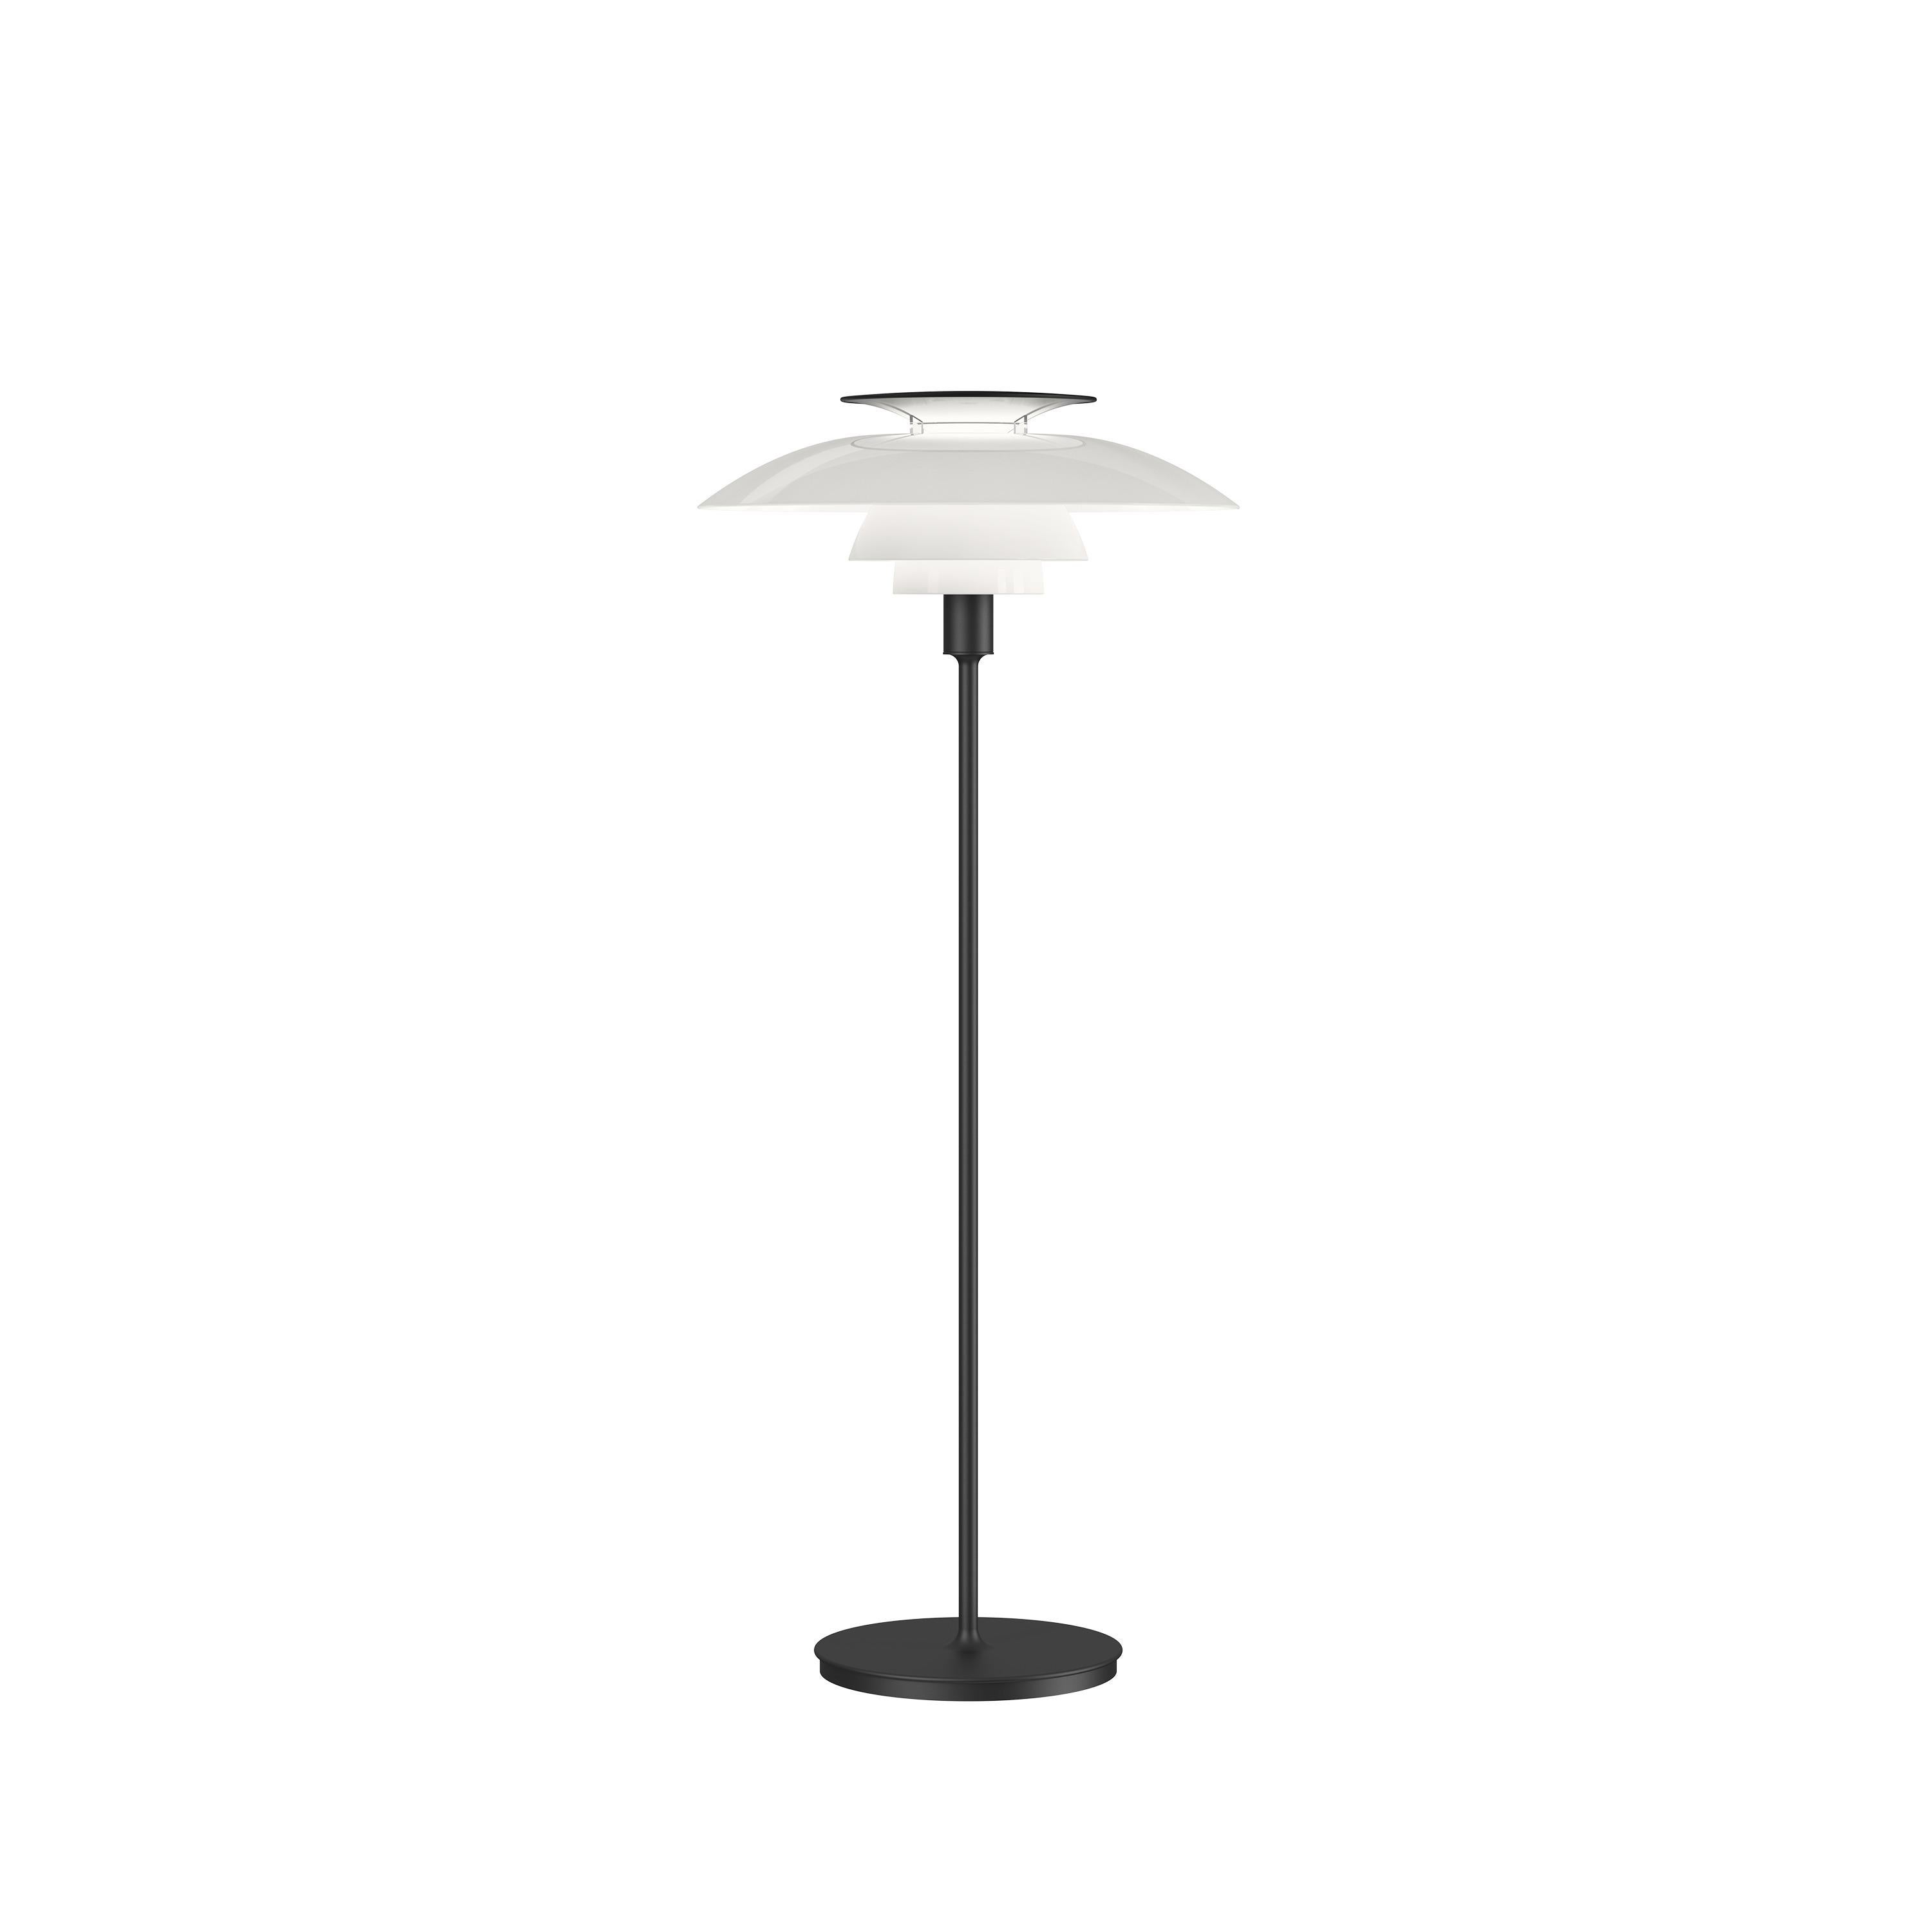 Poul Henningsen 'PH 80' Floor Lamp for Louis Poulsen in White In New Condition For Sale In Glendale, CA